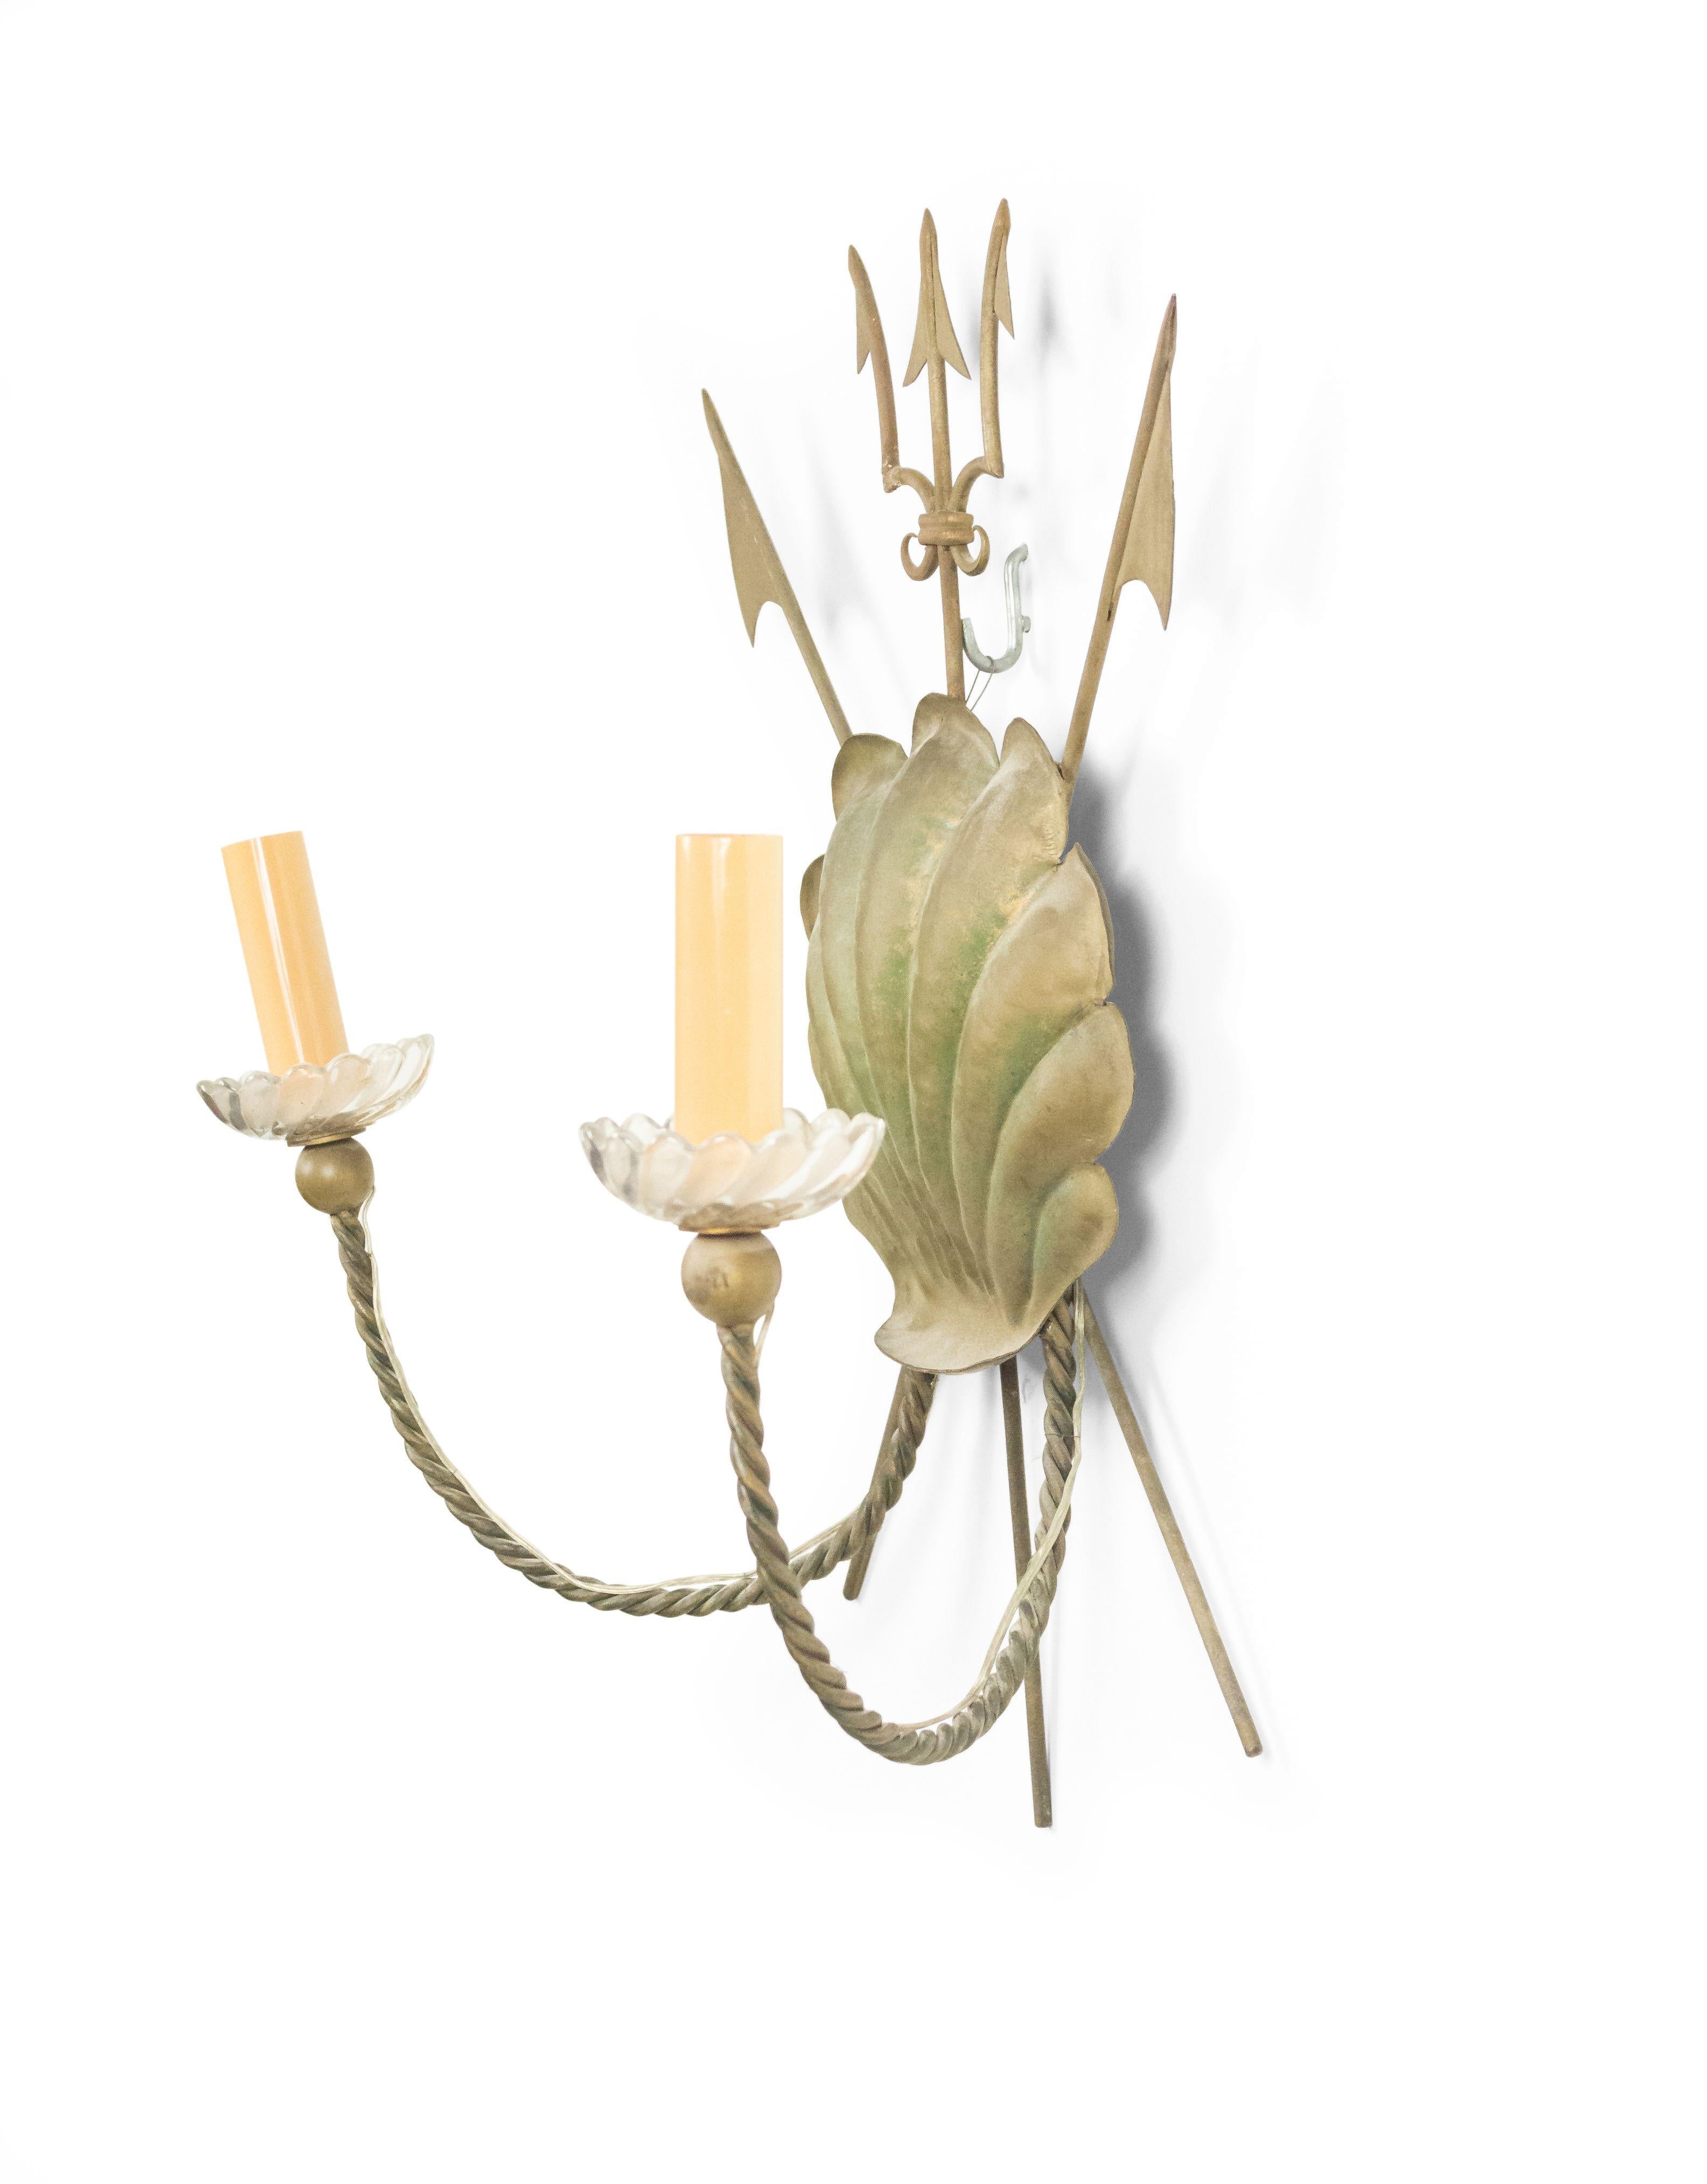 French 1940s nautical brass rope and trident 2-arm wall sconce with shell medallion and crystal bobeche.